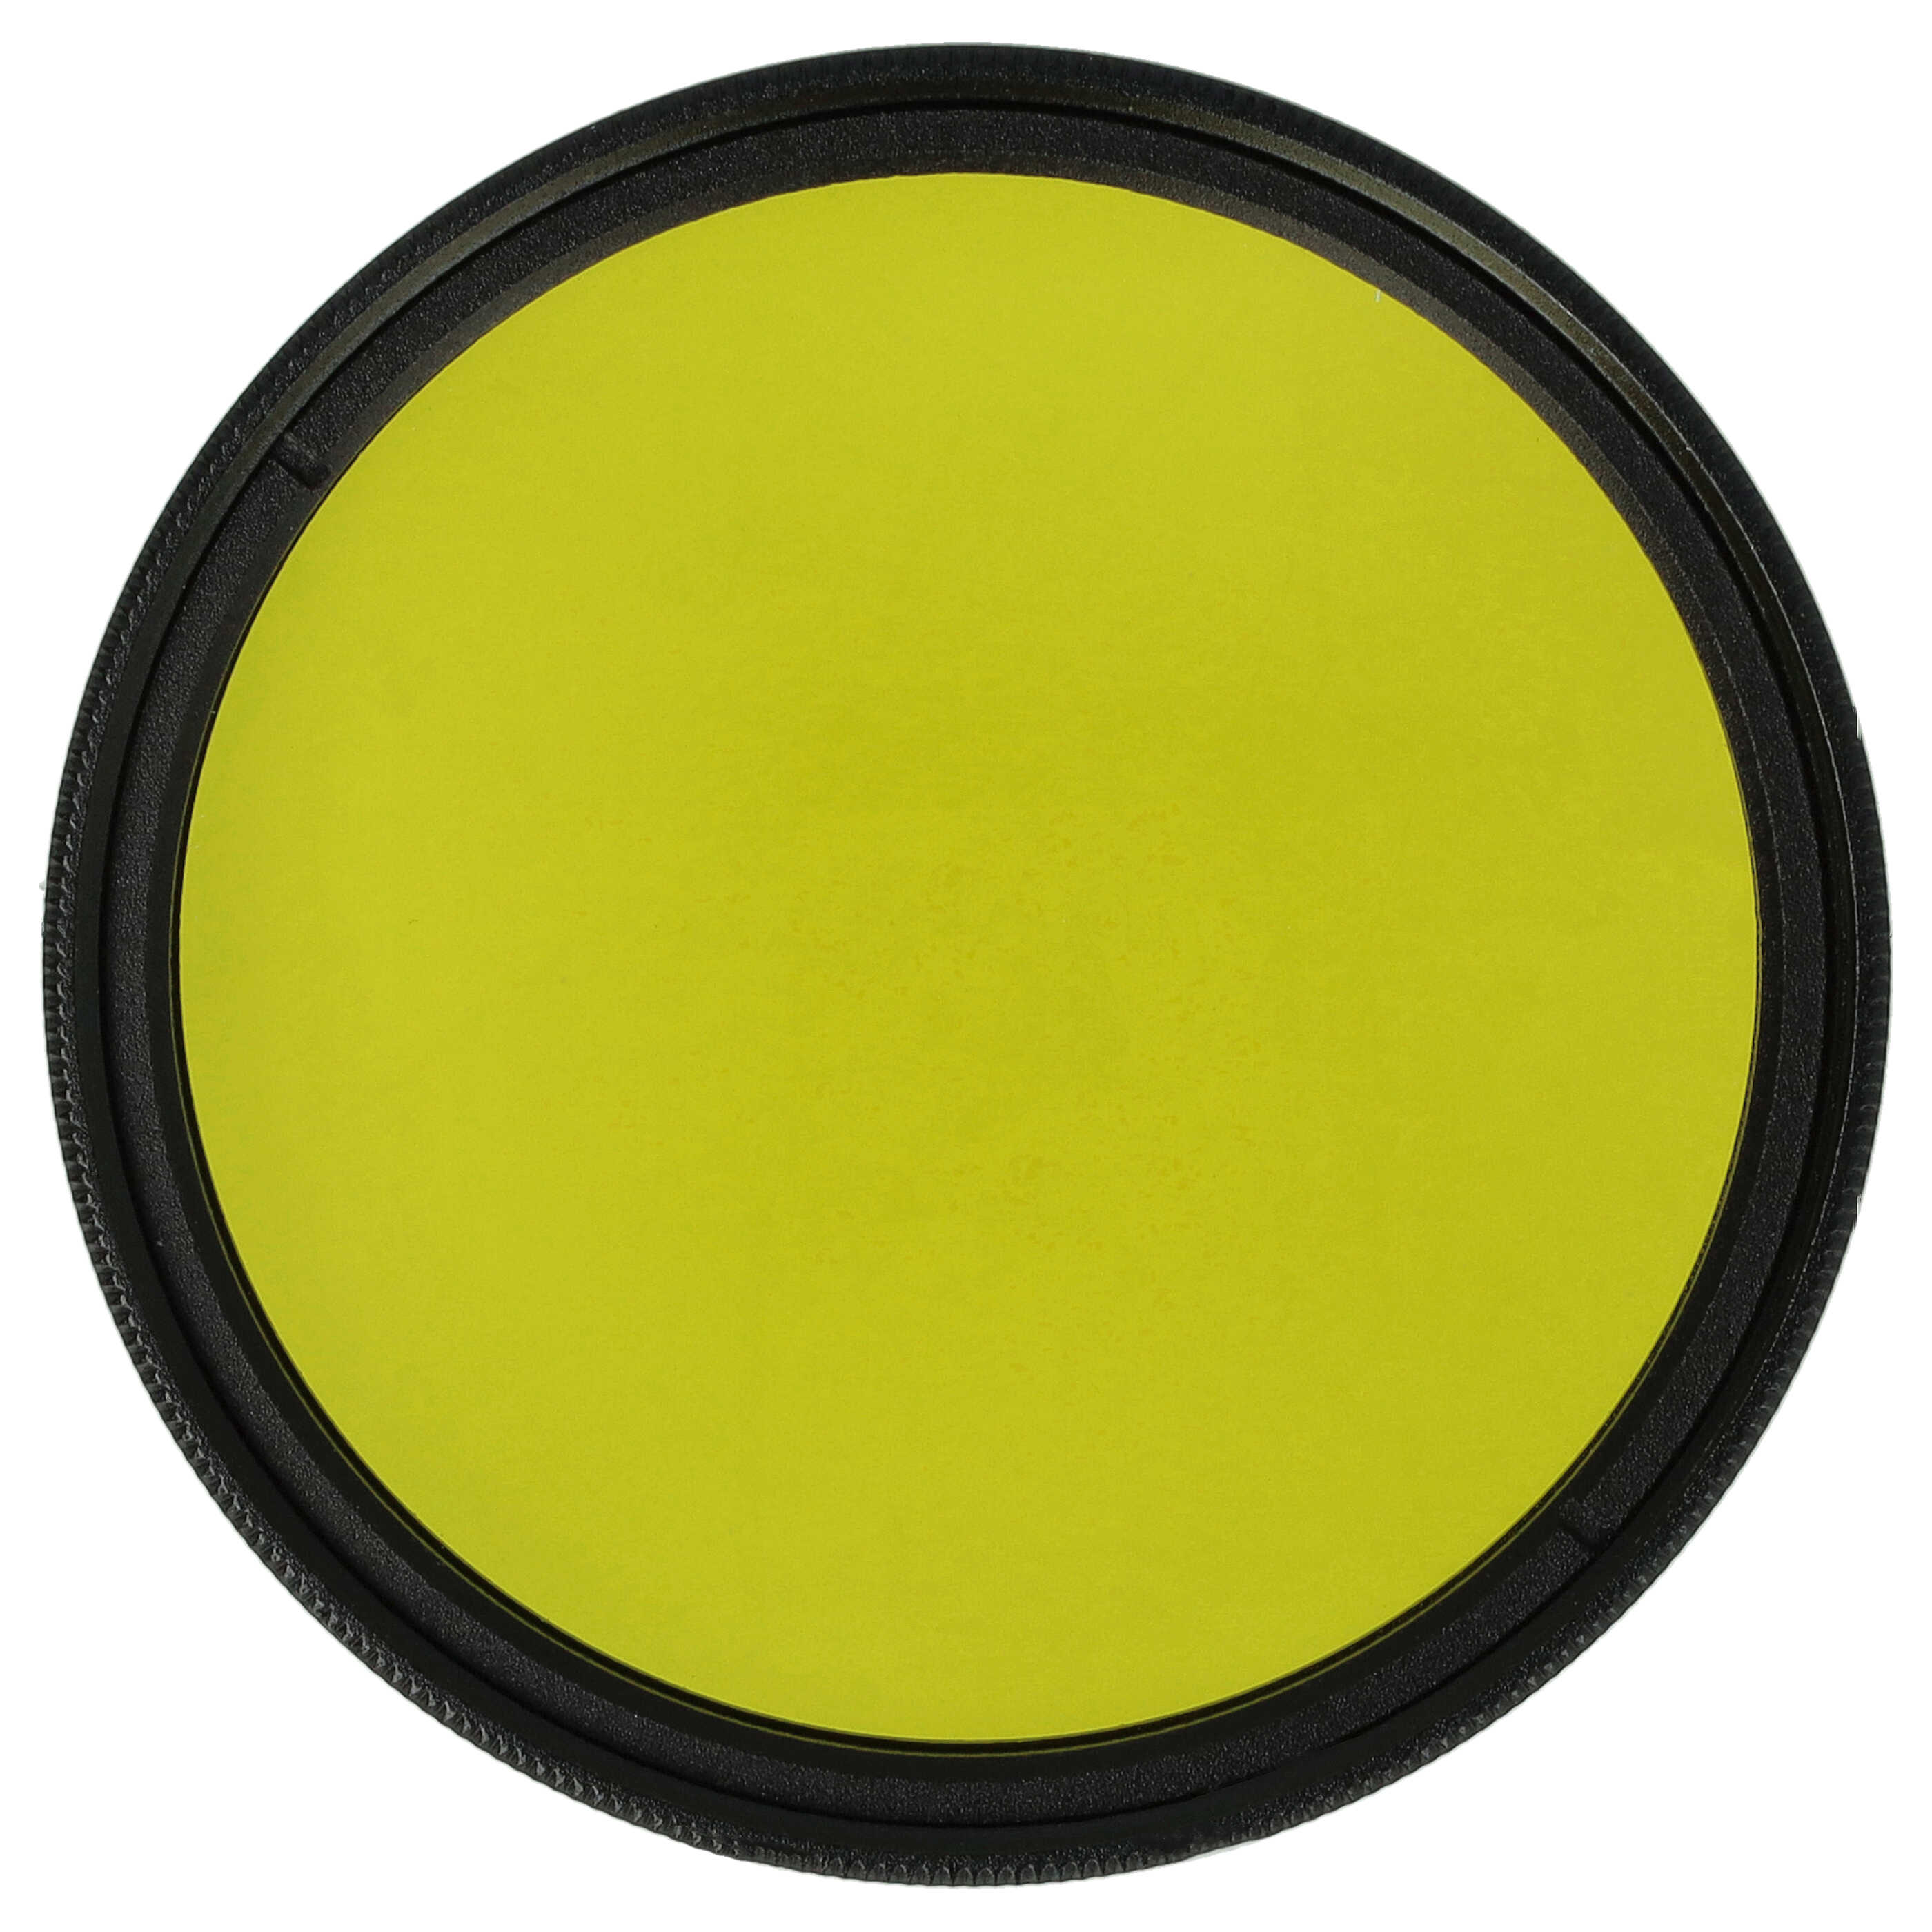 Coloured Filter, Yellow suitable for Camera Lenses with 49 mm Filter Thread - Yellow Filter